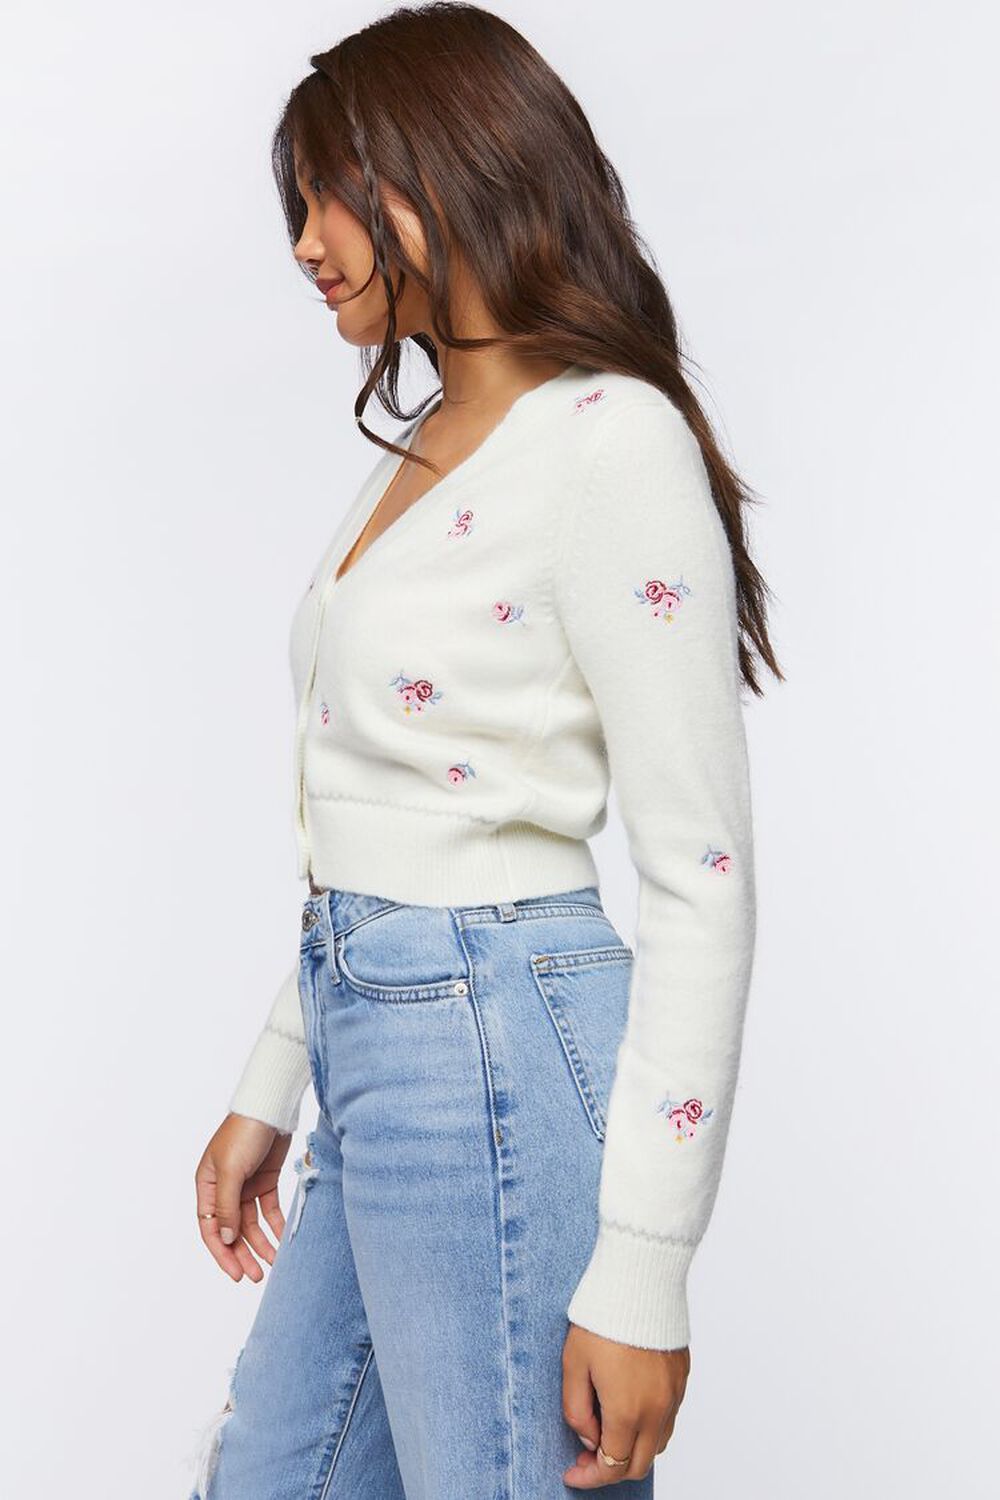 CREAM/MULTI Embroidered Floral Cardigan Sweater, image 2